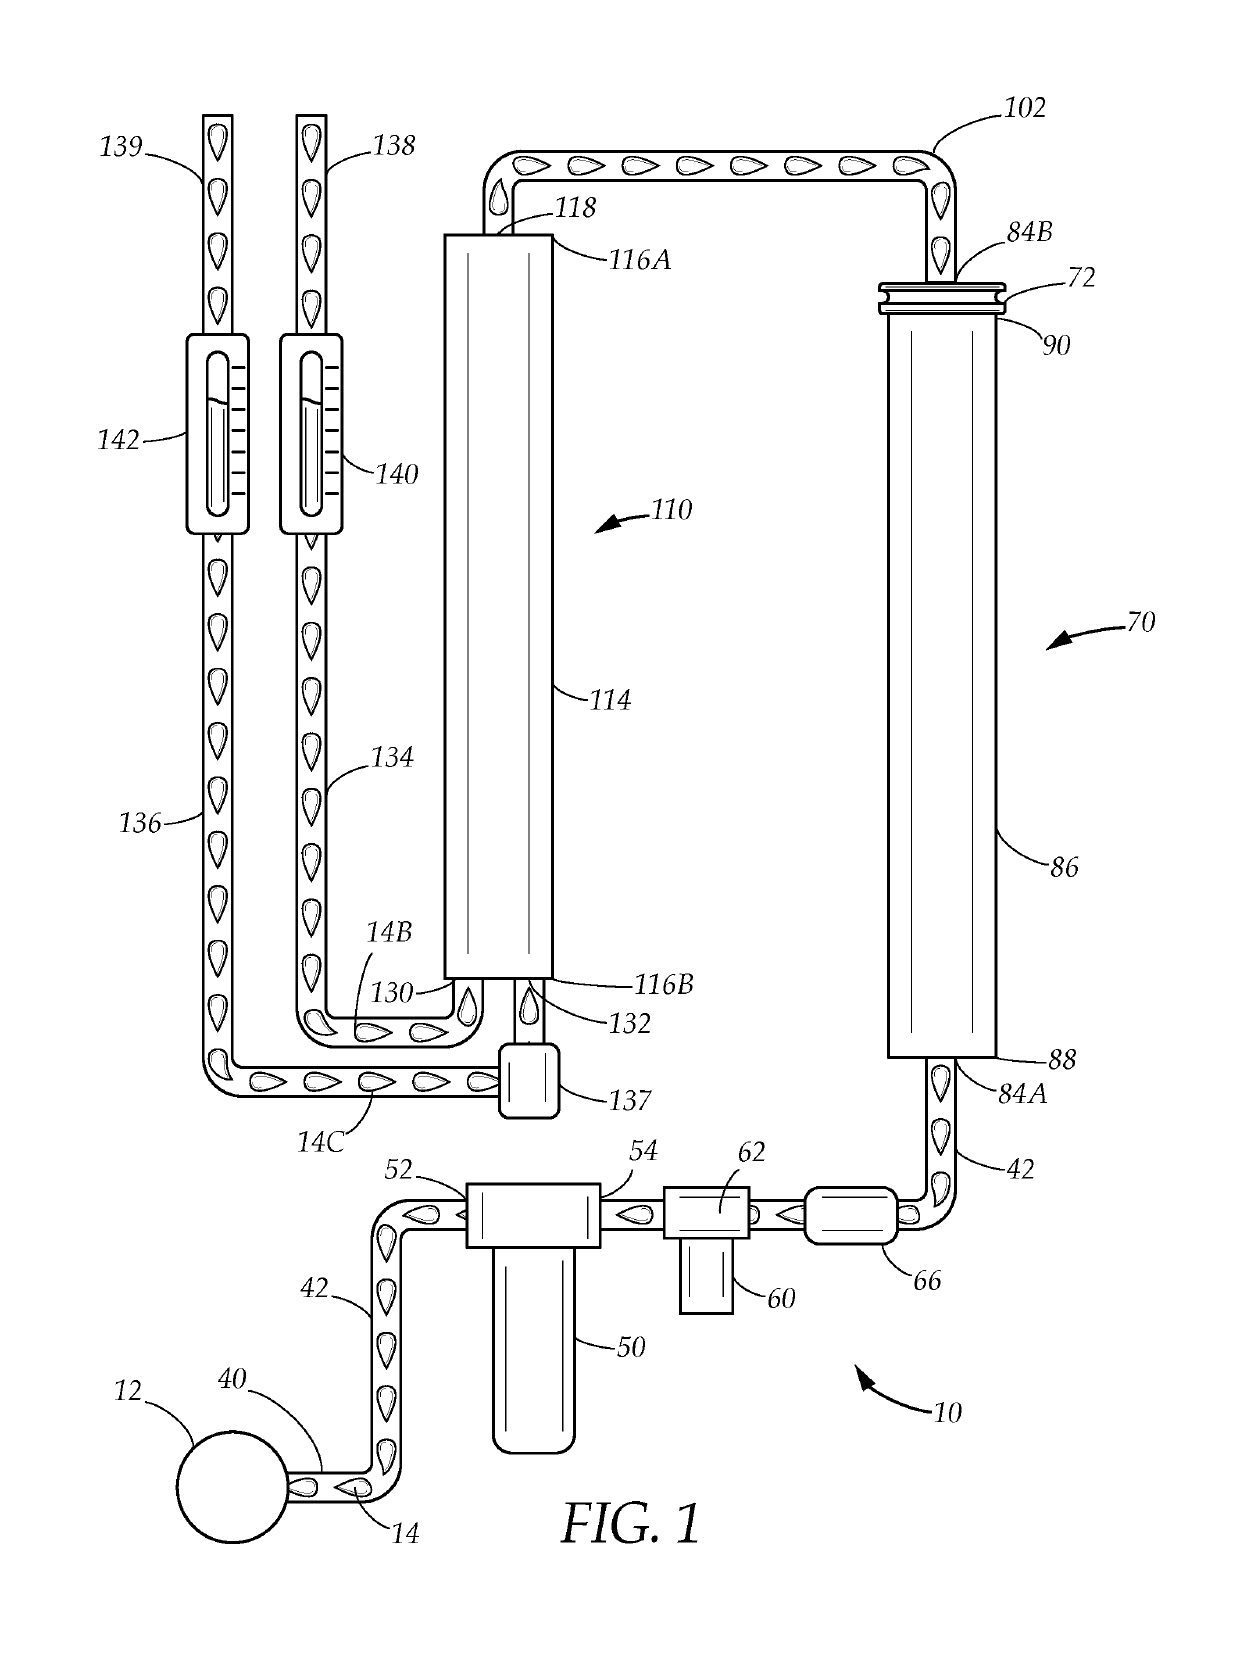 Pump-assisted water filtration system